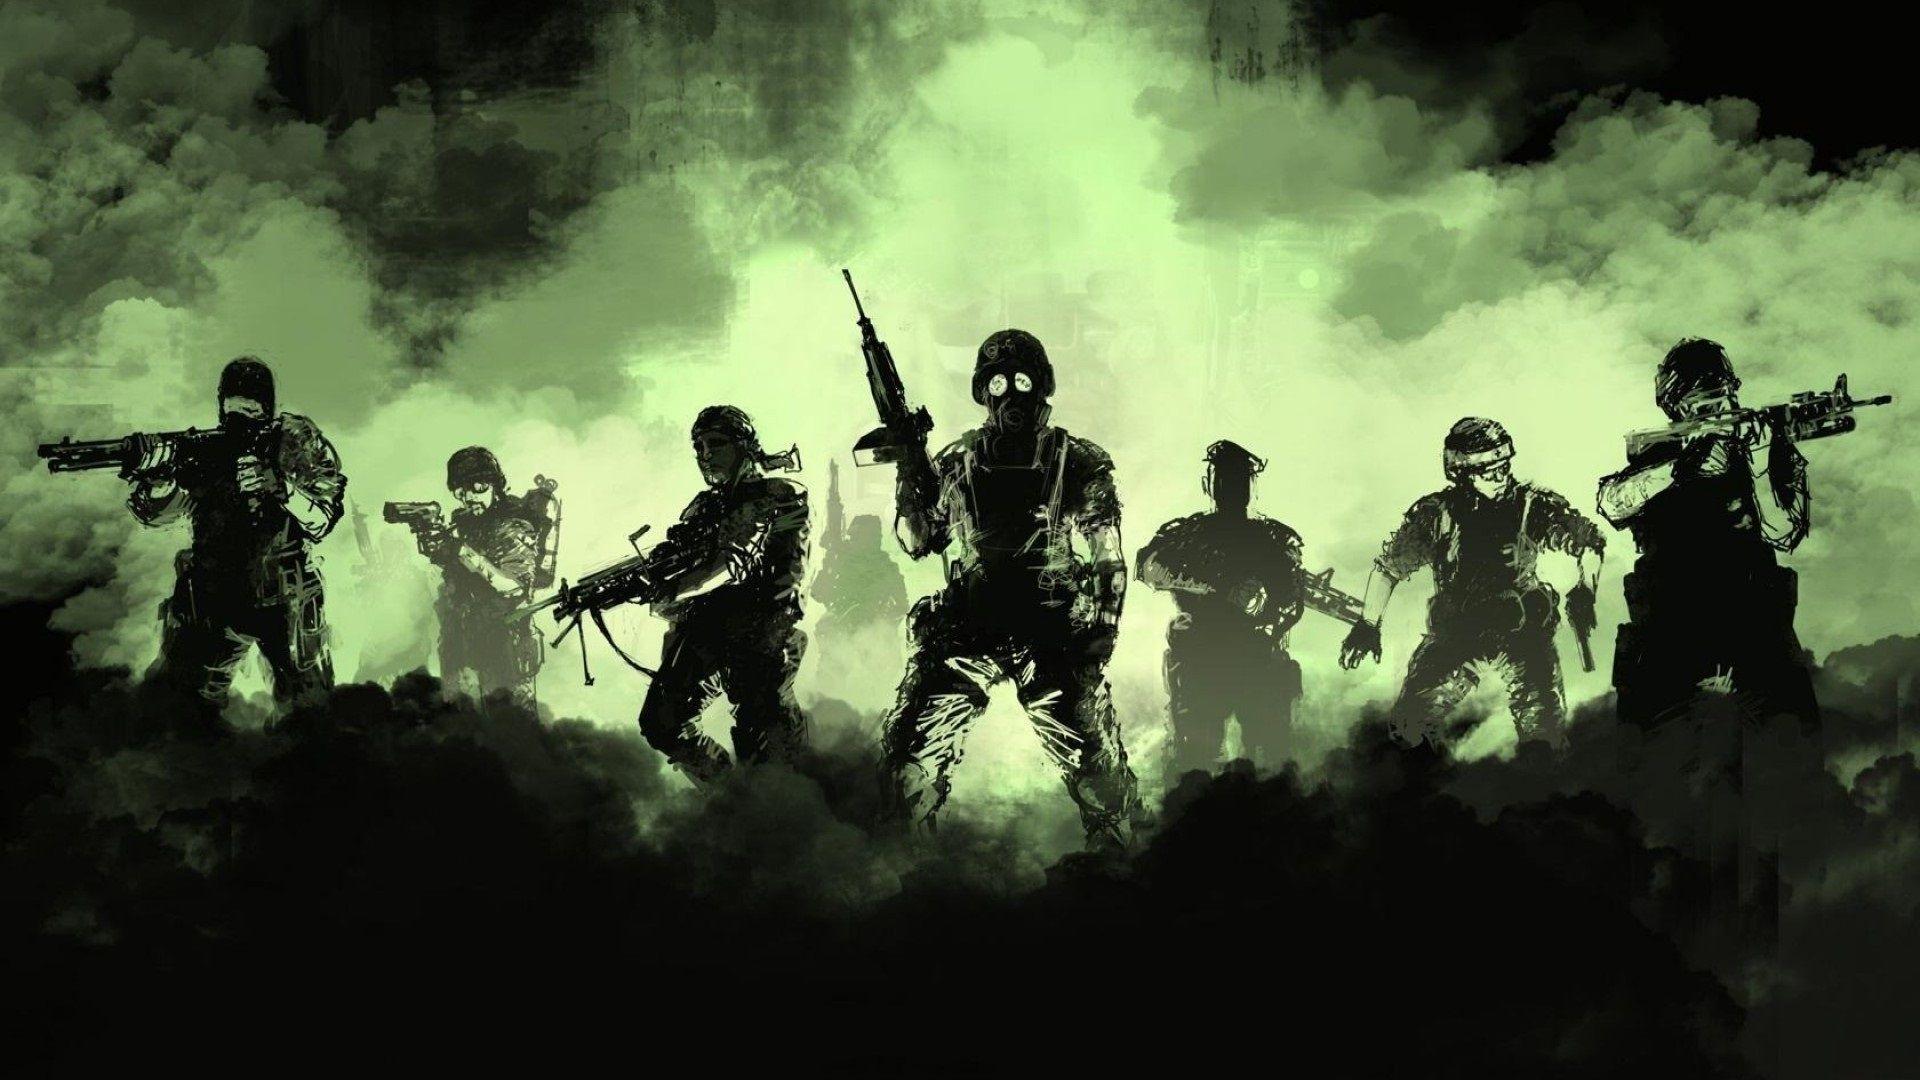 HD Army Wallpaper and Background Image For Download. Army